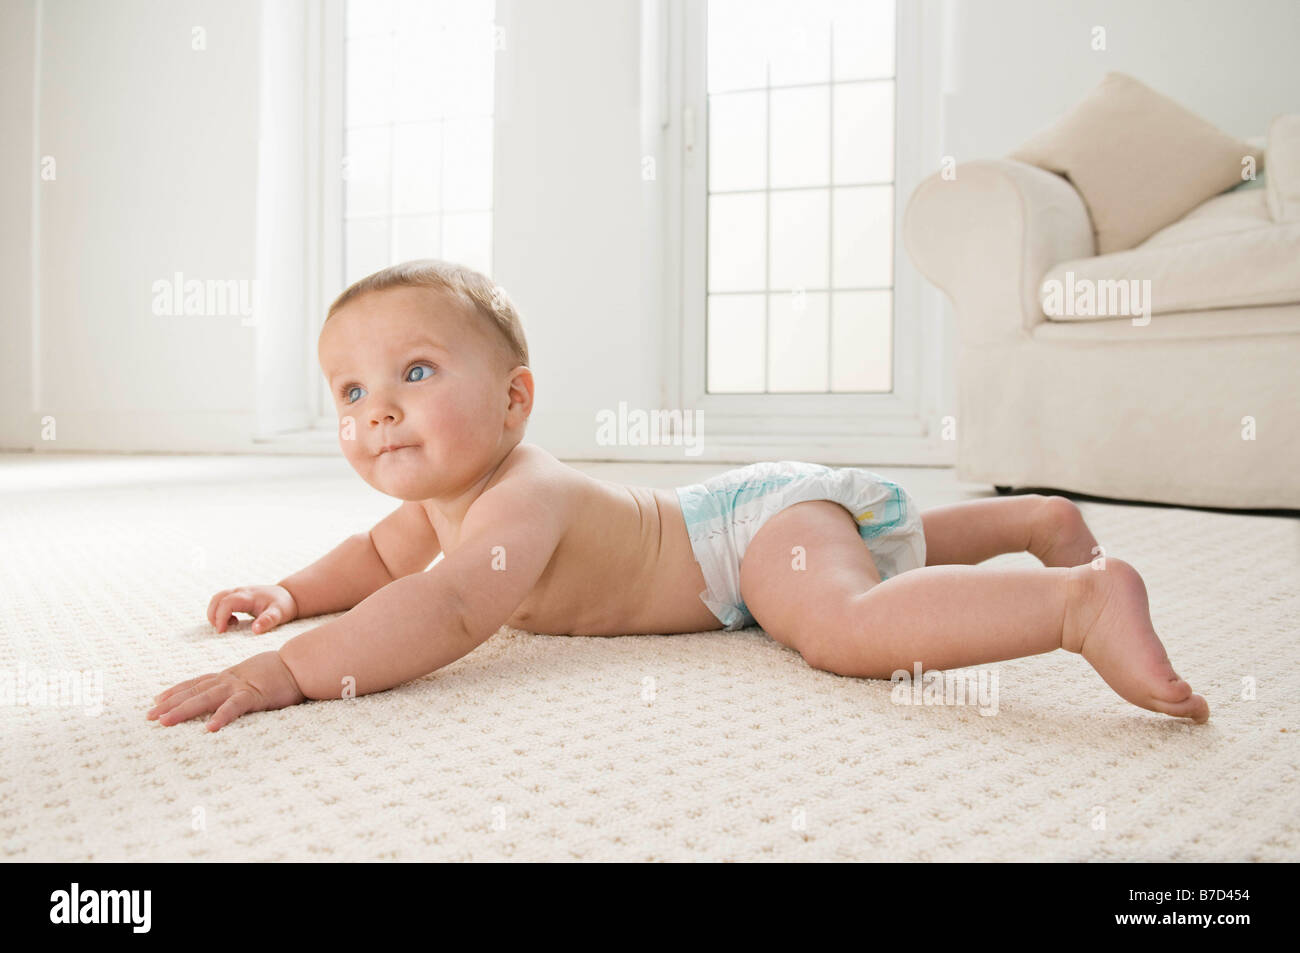 A baby lying on the lounge carpet. Stock Photo